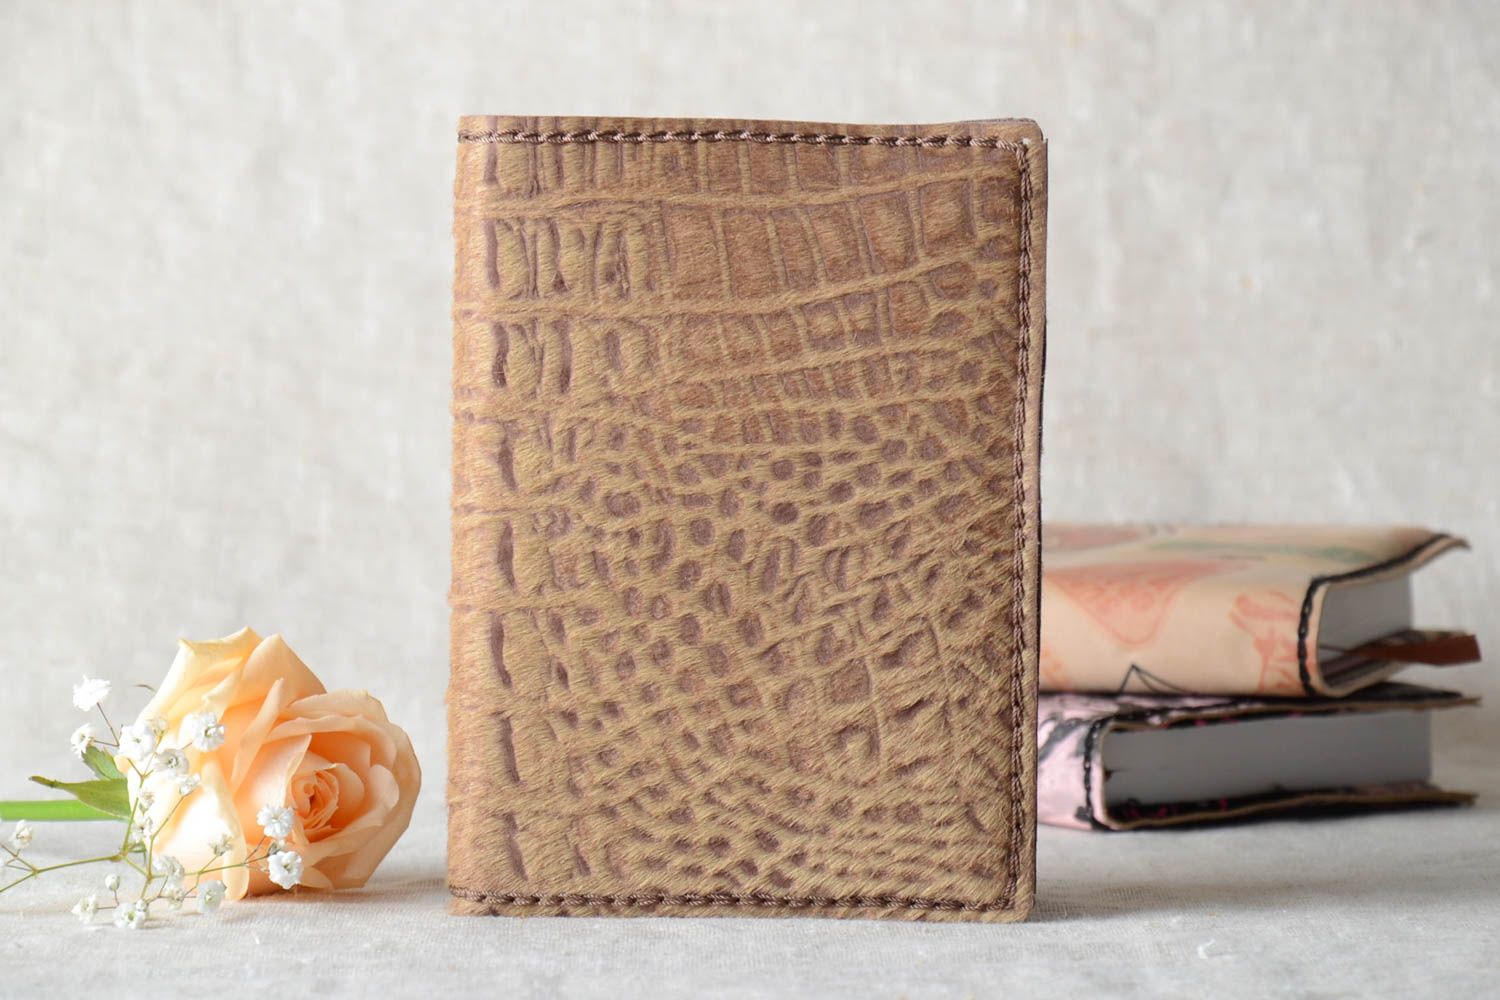 Leather notebook cover handmade leather goods leather book covers souvenir ideas photo 1